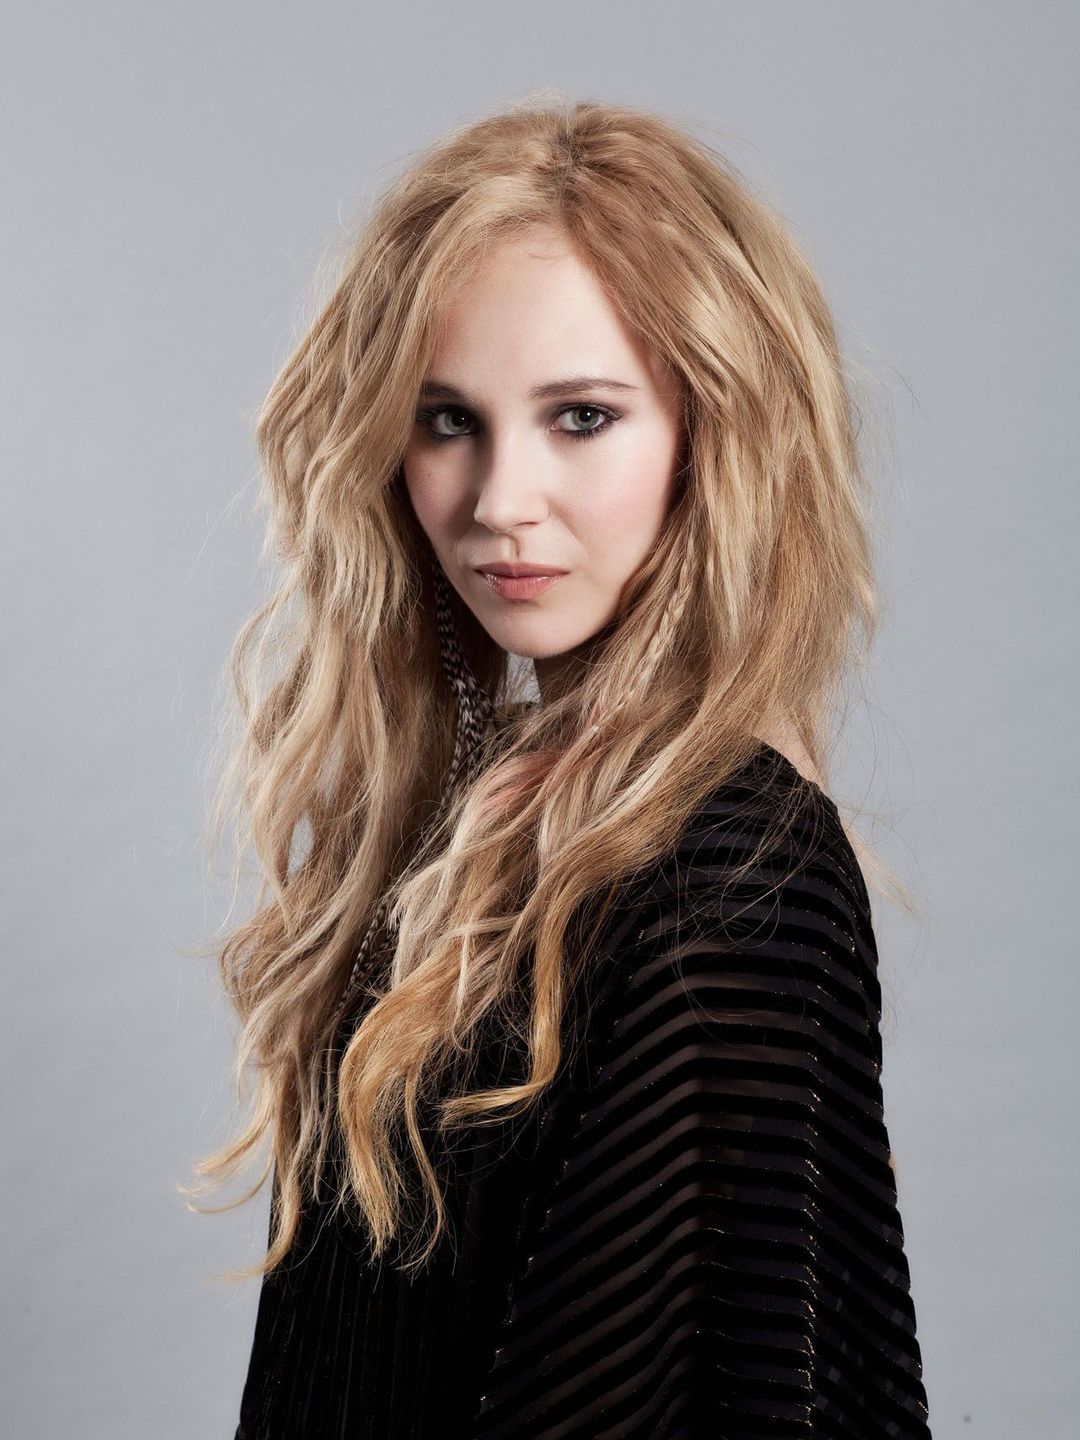 Juno Temple height and weight